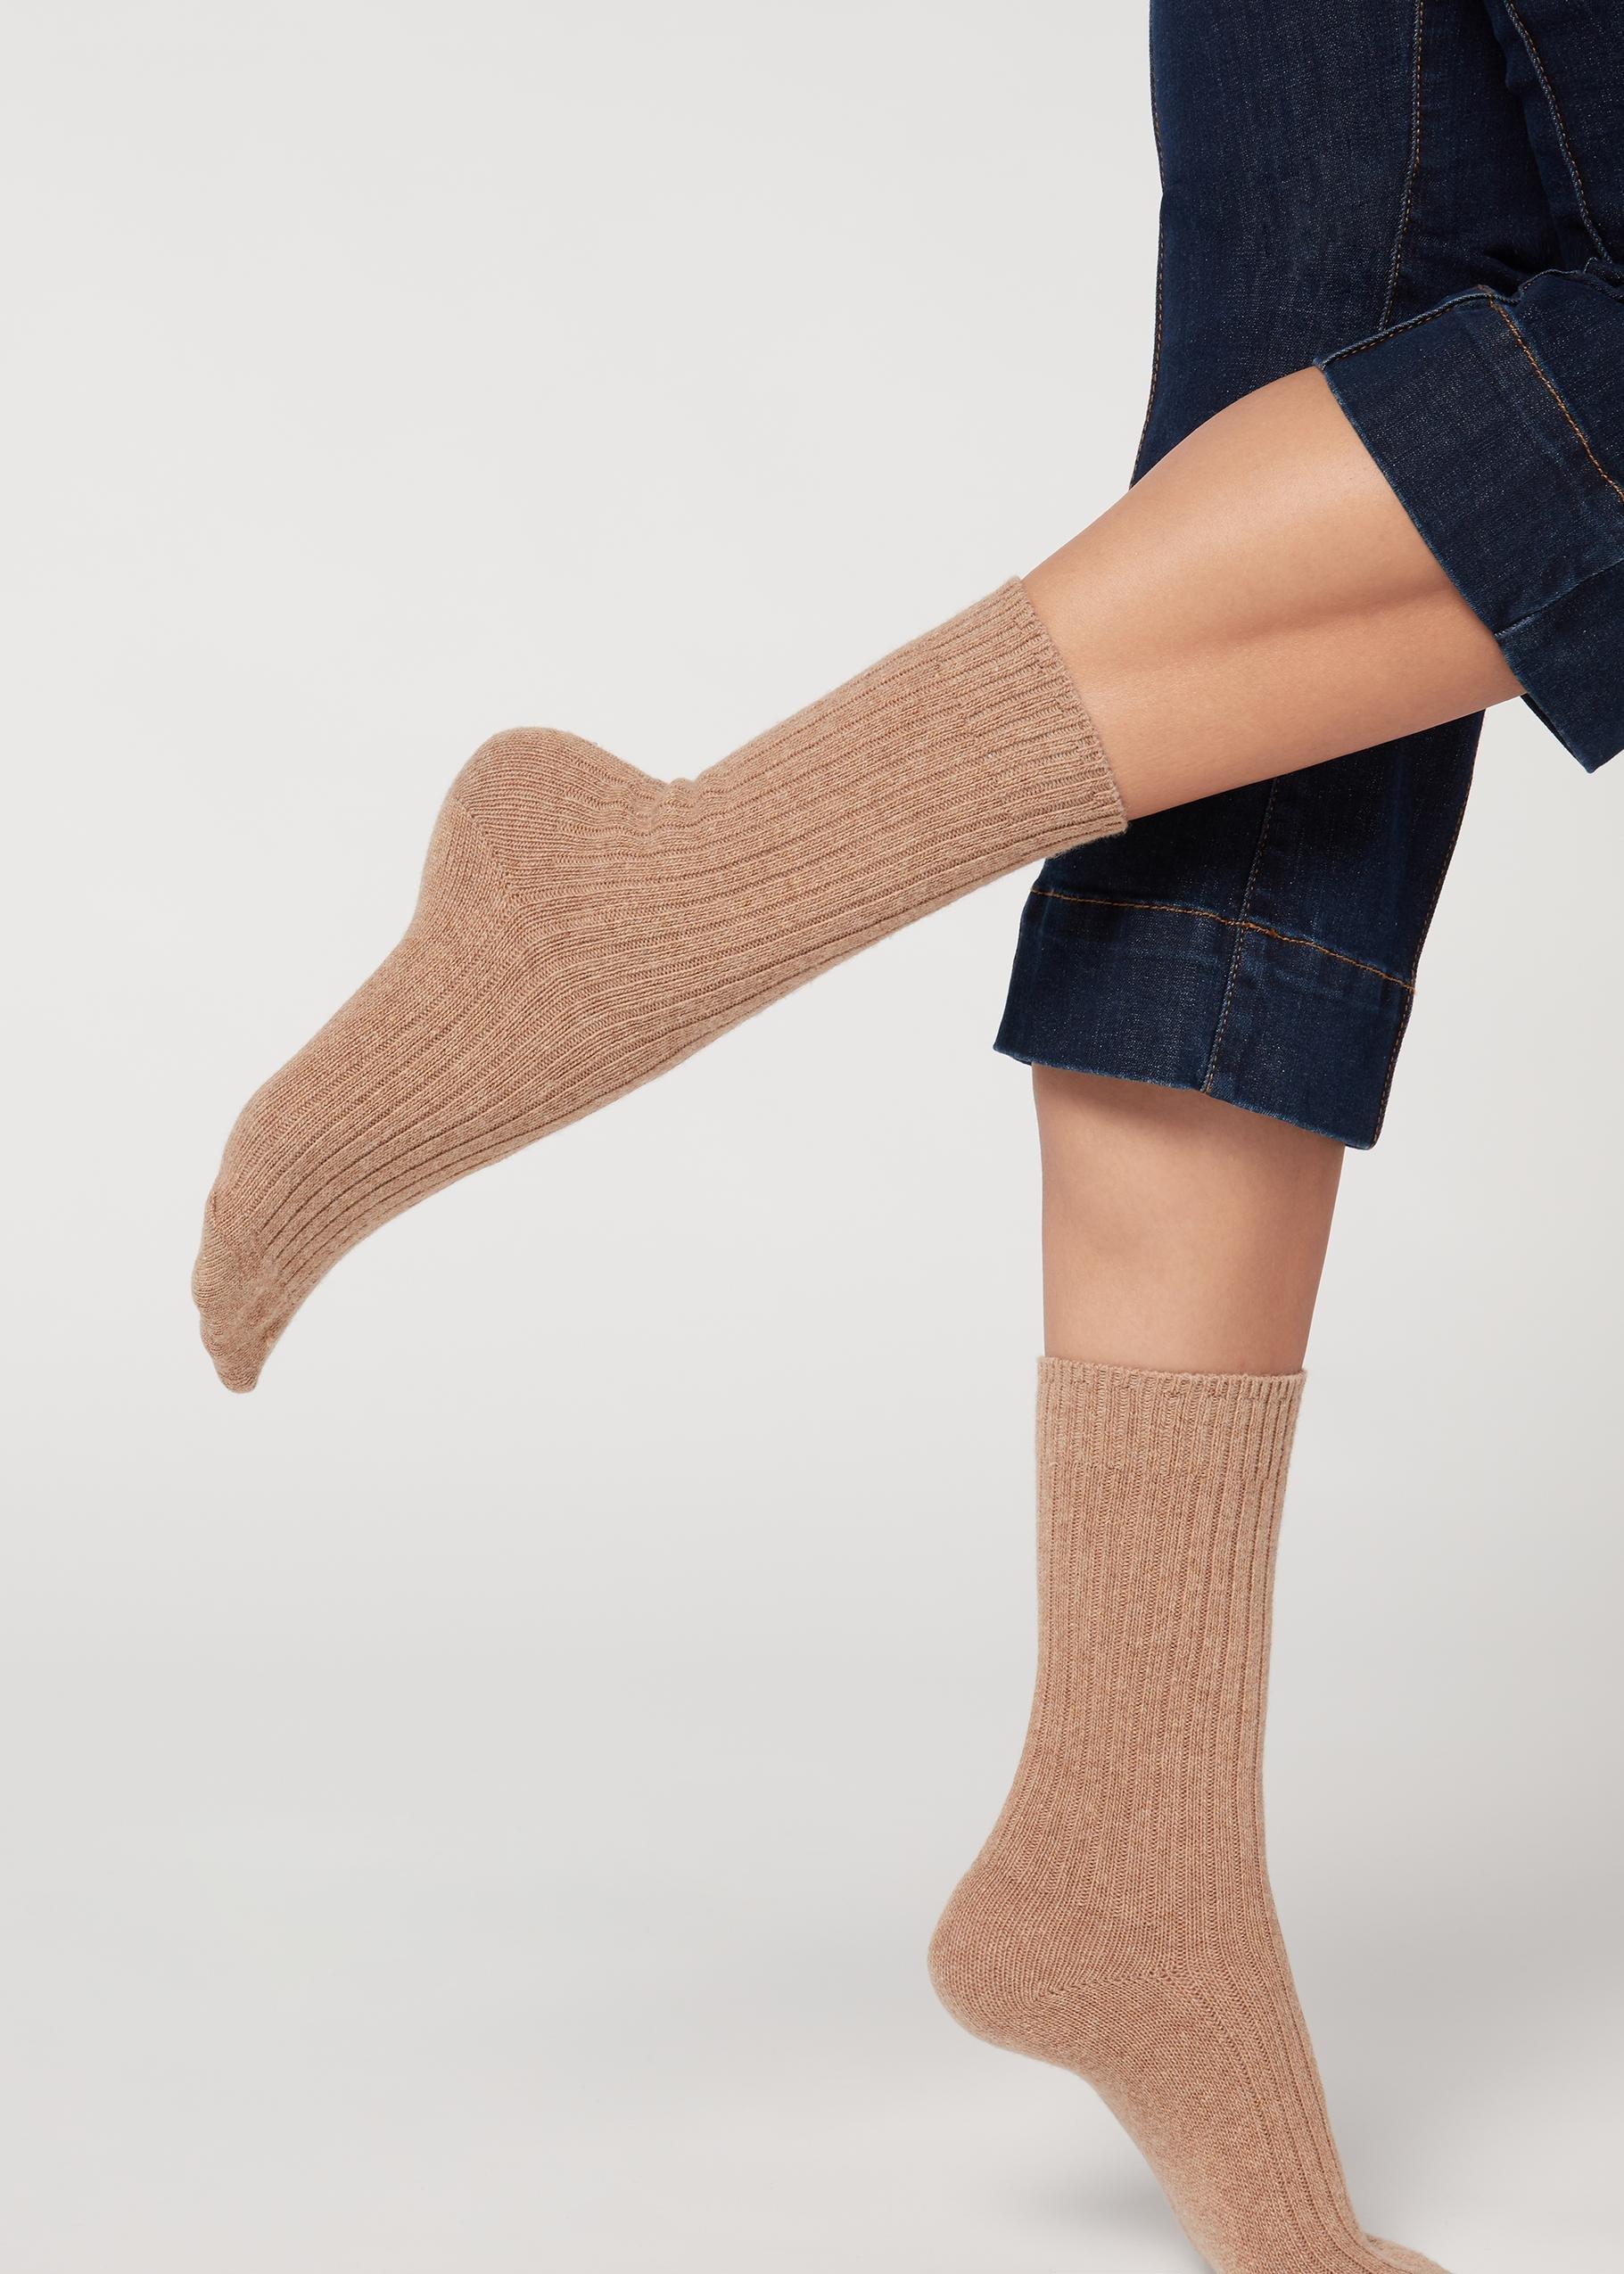 Calzedonia - Brown Camel Short Ribbed Socks With Wool And Cashmere, Women - One-Size